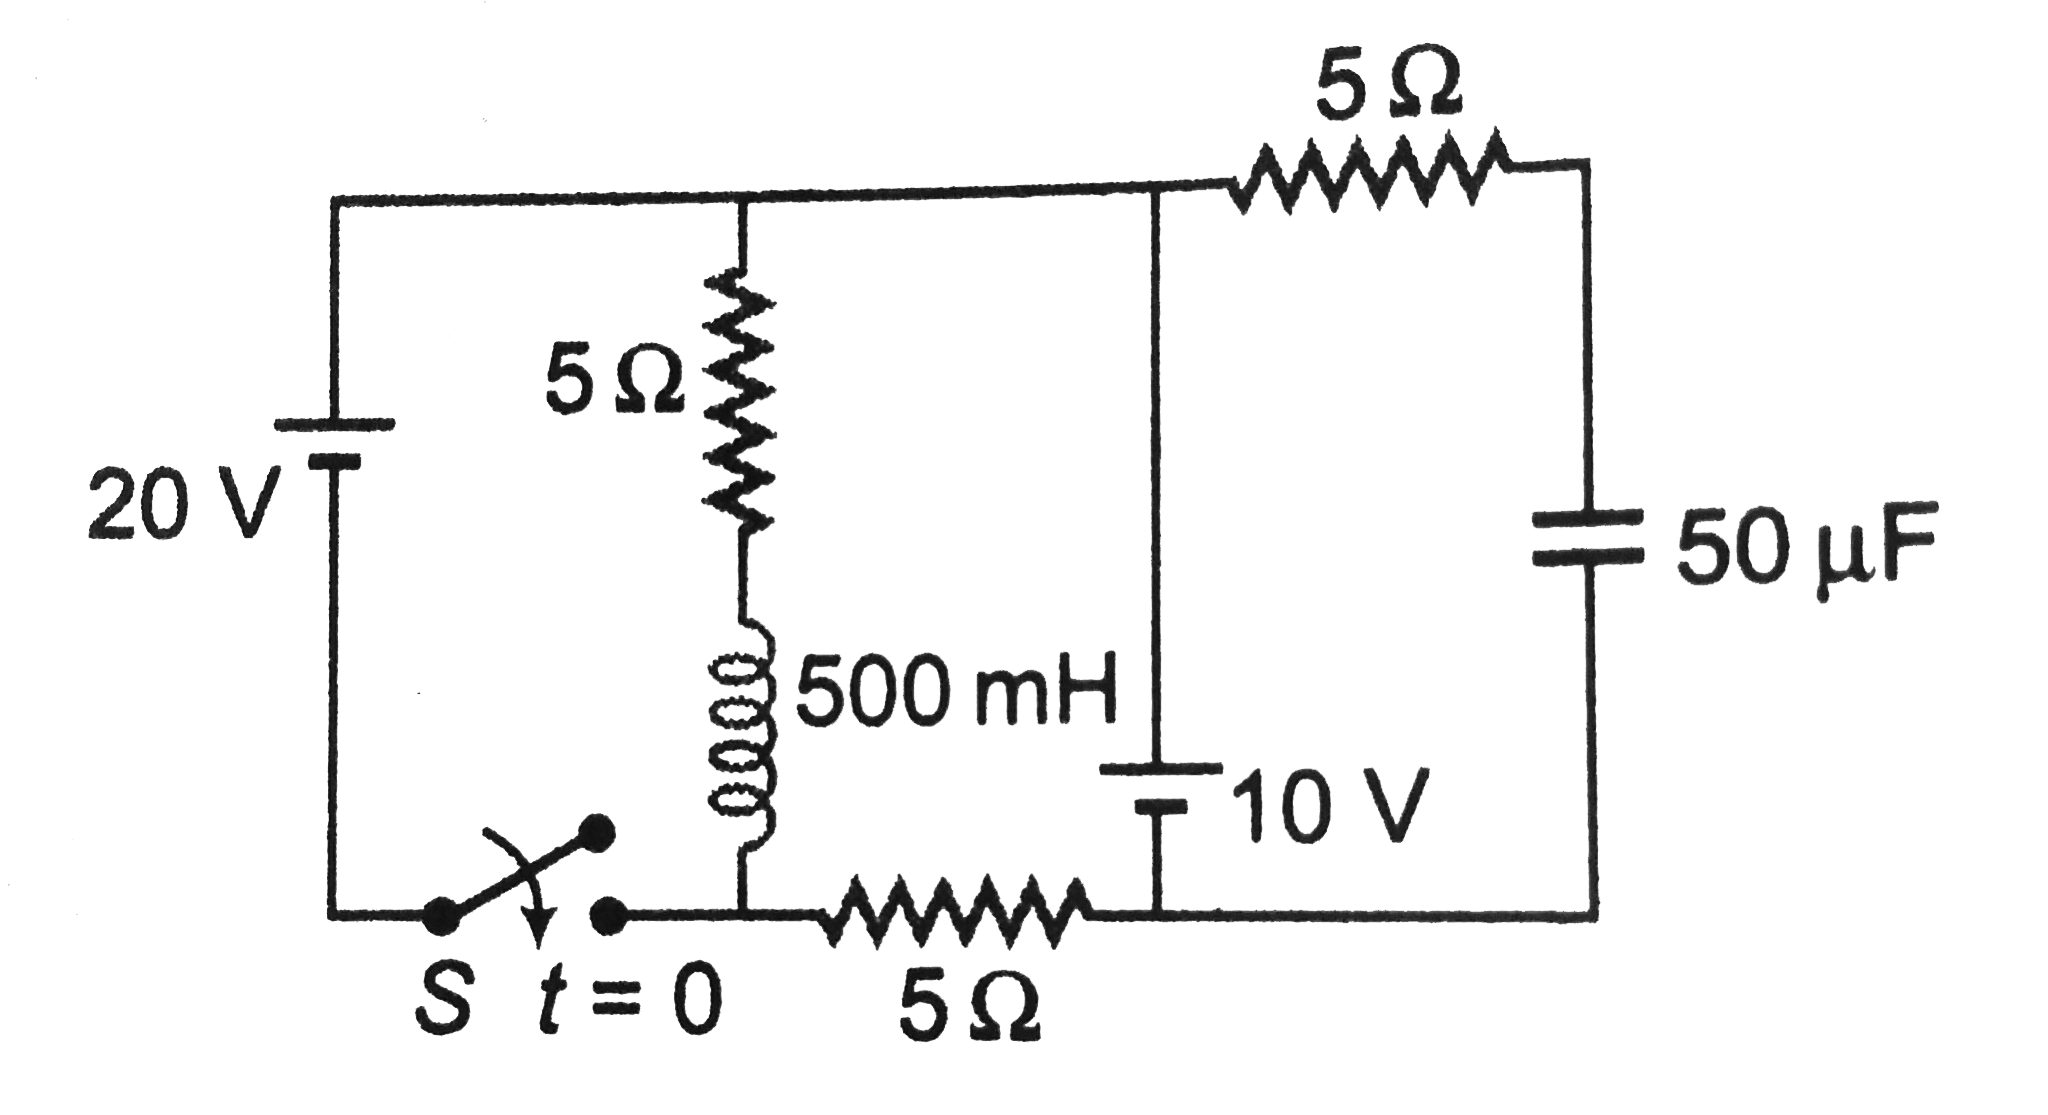 Switch S is closed t=0, in the circuit shown. The change in flux in th